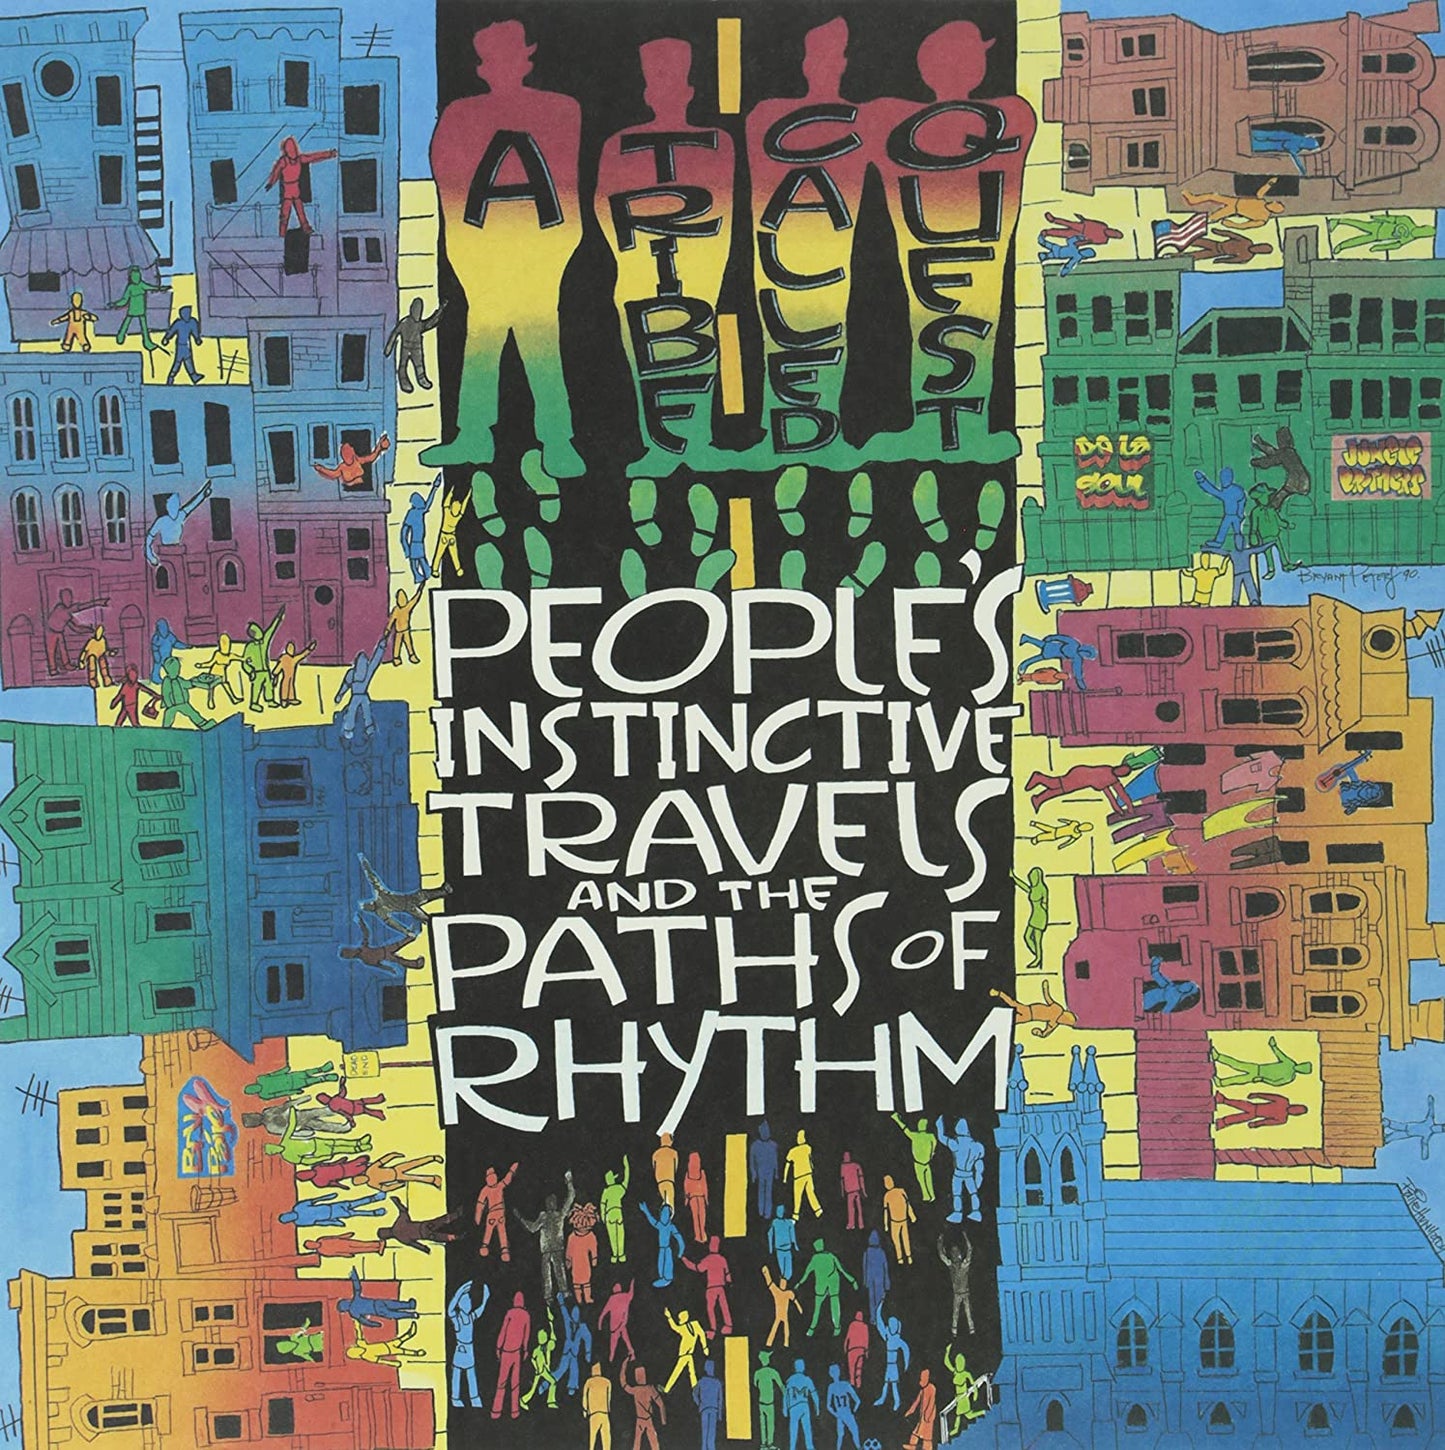 A TRIBE CALLED QUEST - PEOPLE'S INSTINCTIVE TRAVELS AND THE PATHS OF RHYTHM - 2-LP - VINYL LP